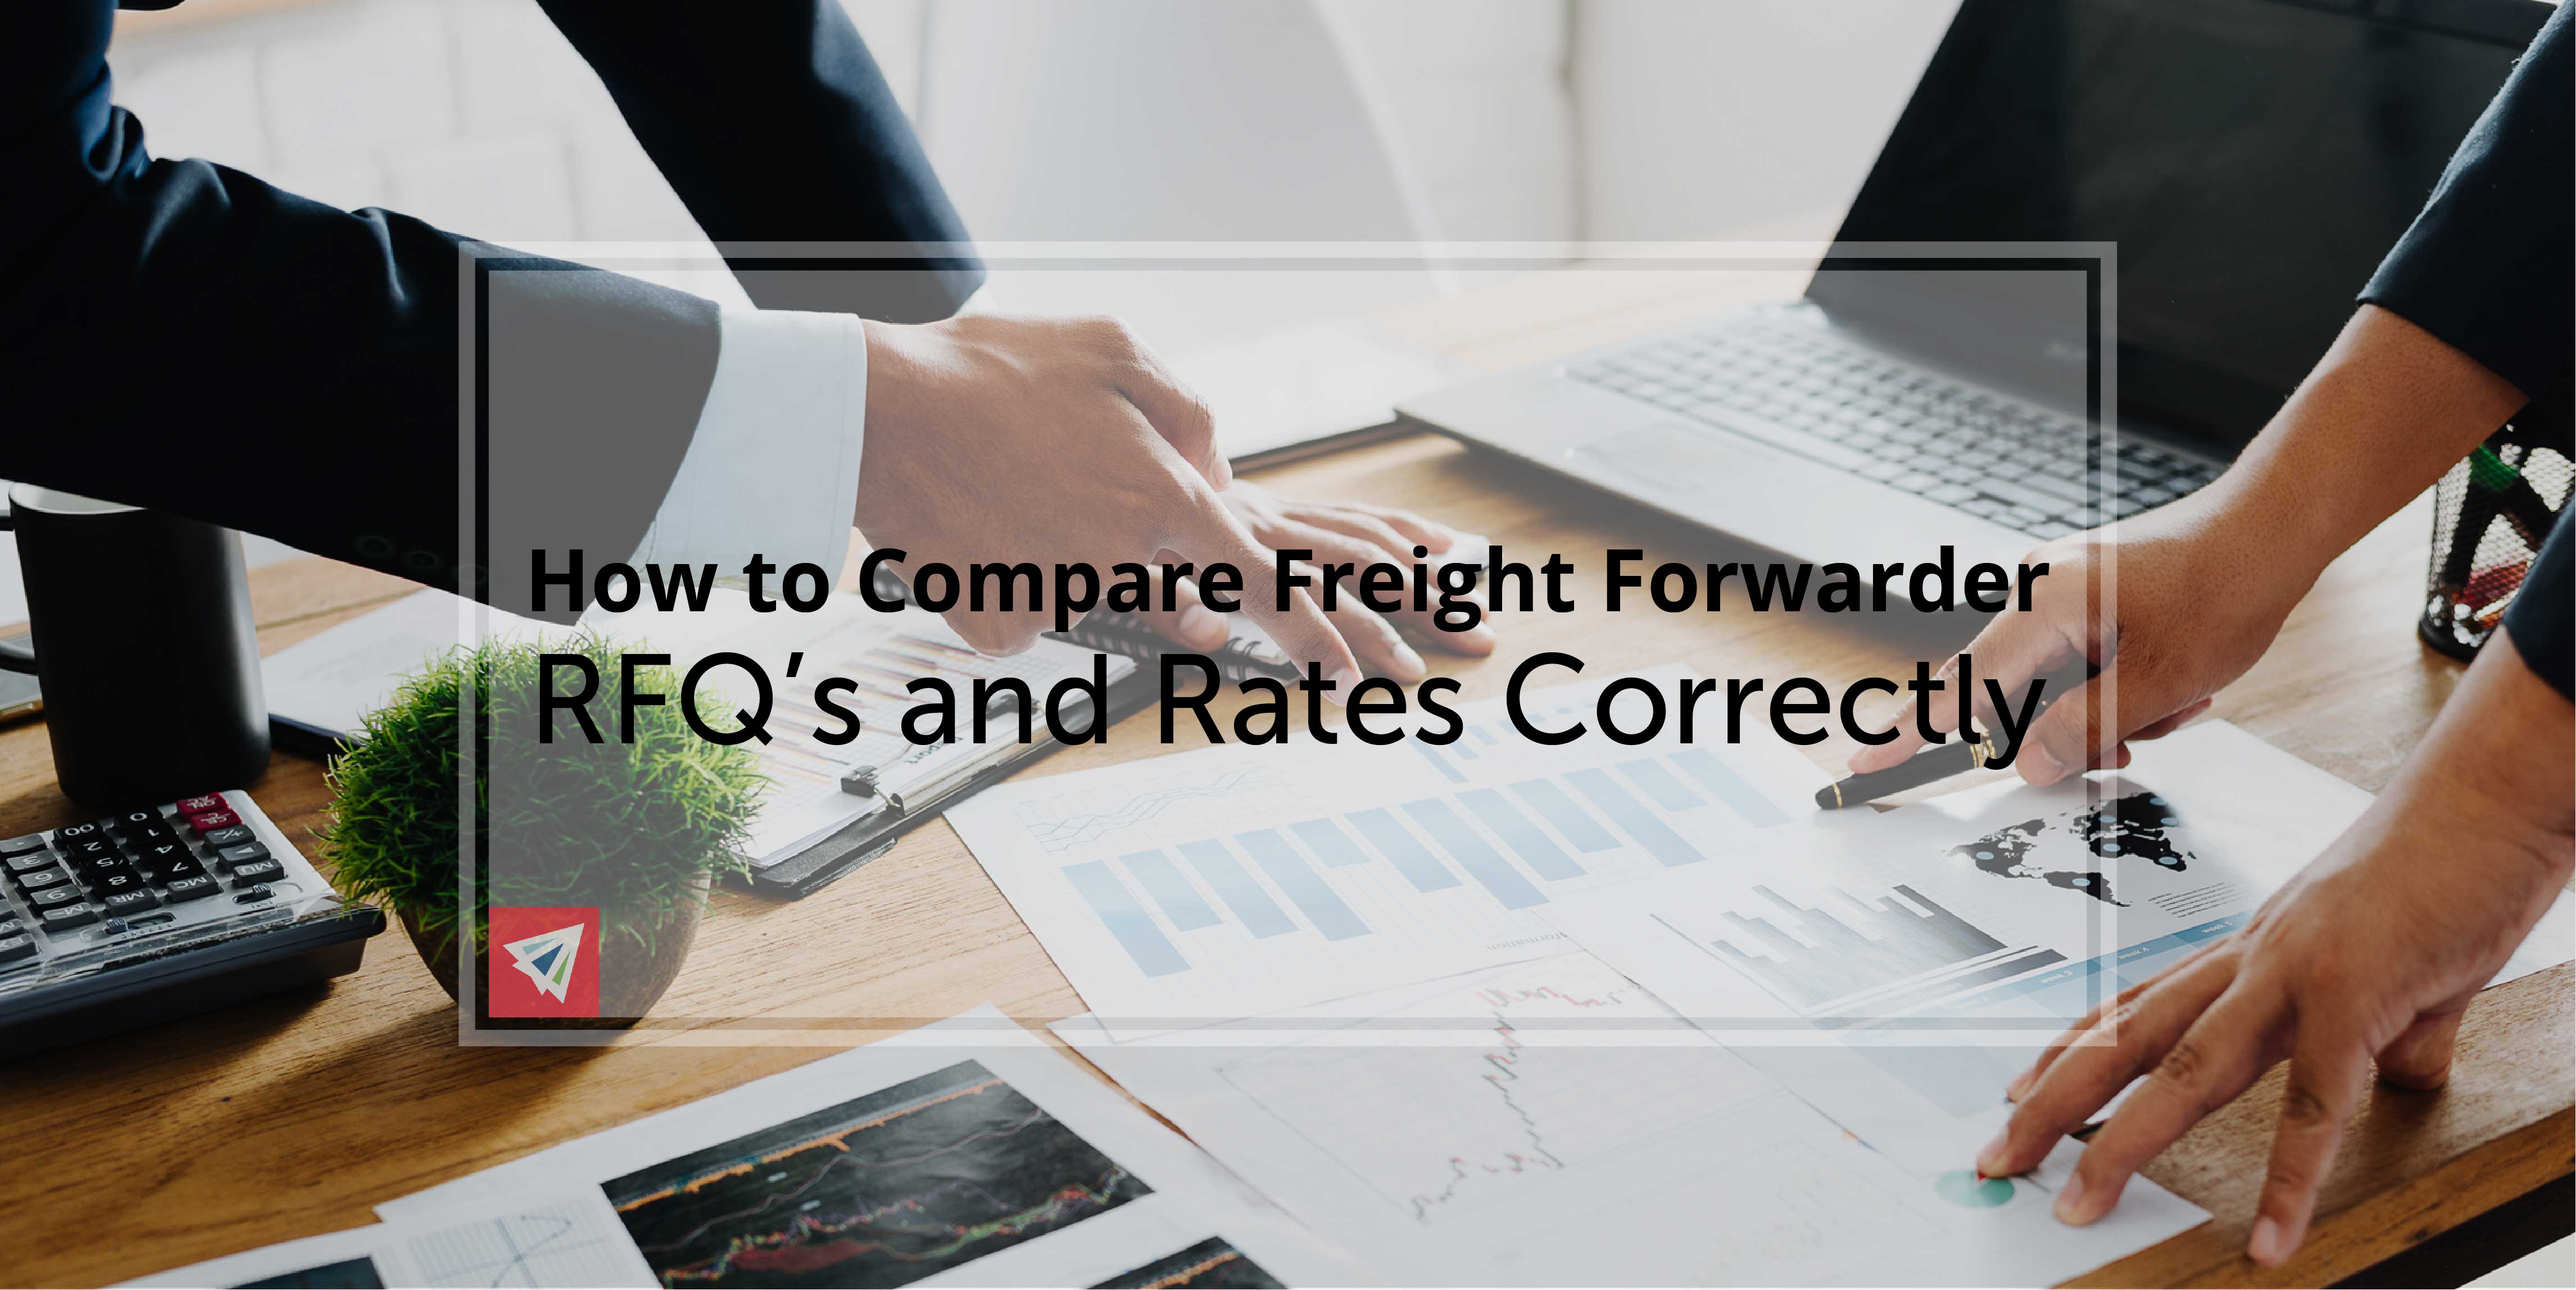 How to Compare Freight Forwarder RFQ's and Rates Correctly Land, Sea, Air Shipping Services InterlogUSA